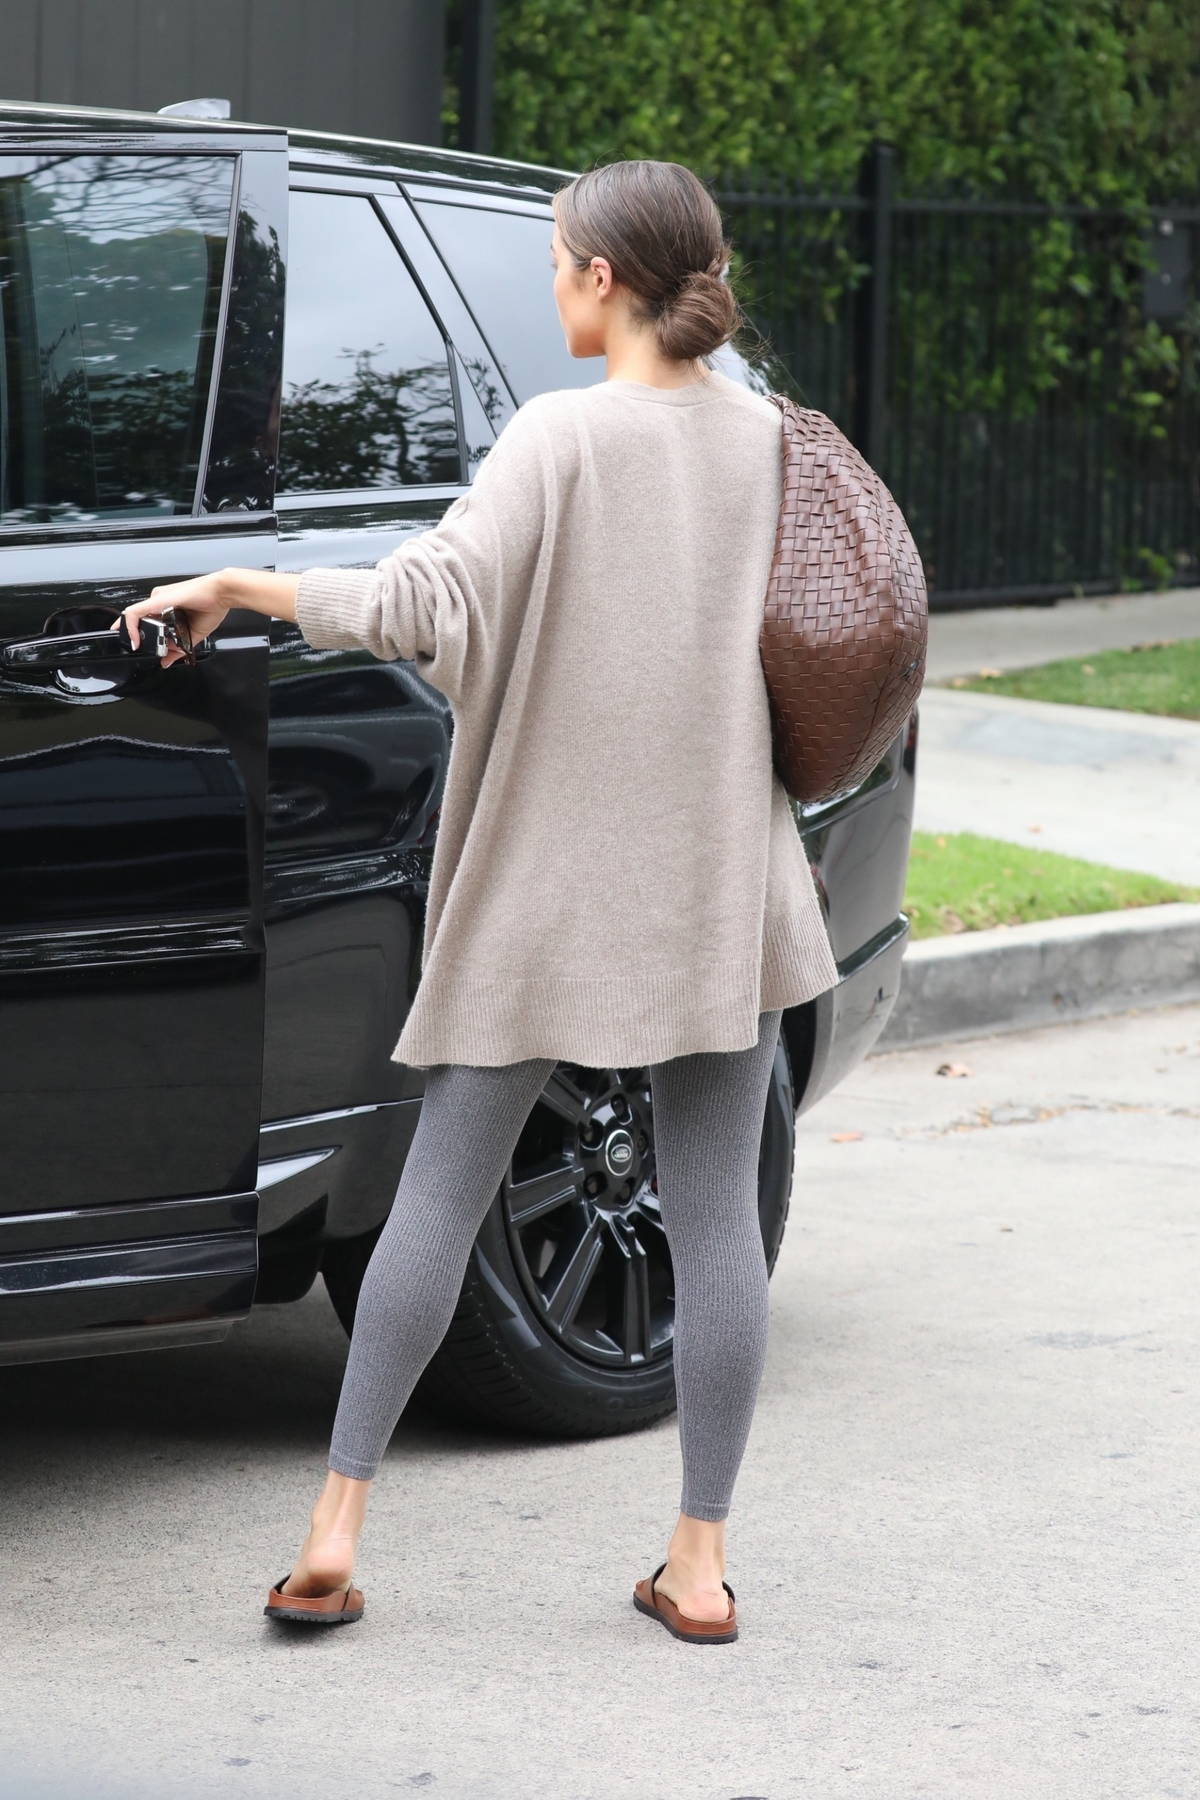 Olivia Culpo looks fantastic in a grey workout top and leggings as